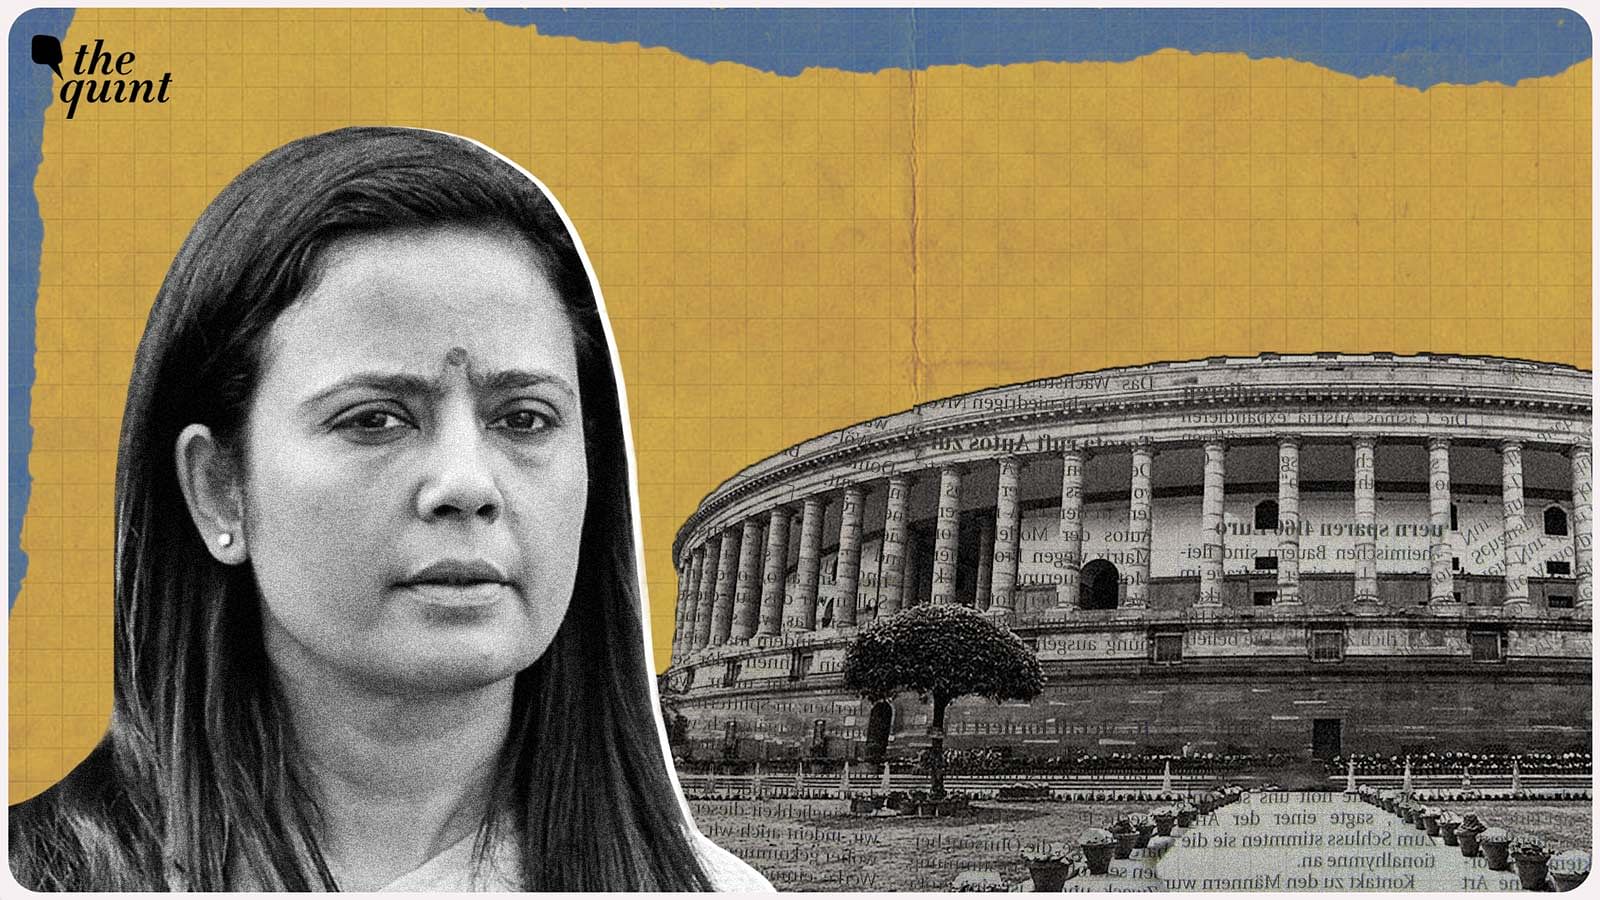 Cash-for-query case: Mahua Moitra says will appear before Ethics Committee  on Nov 2